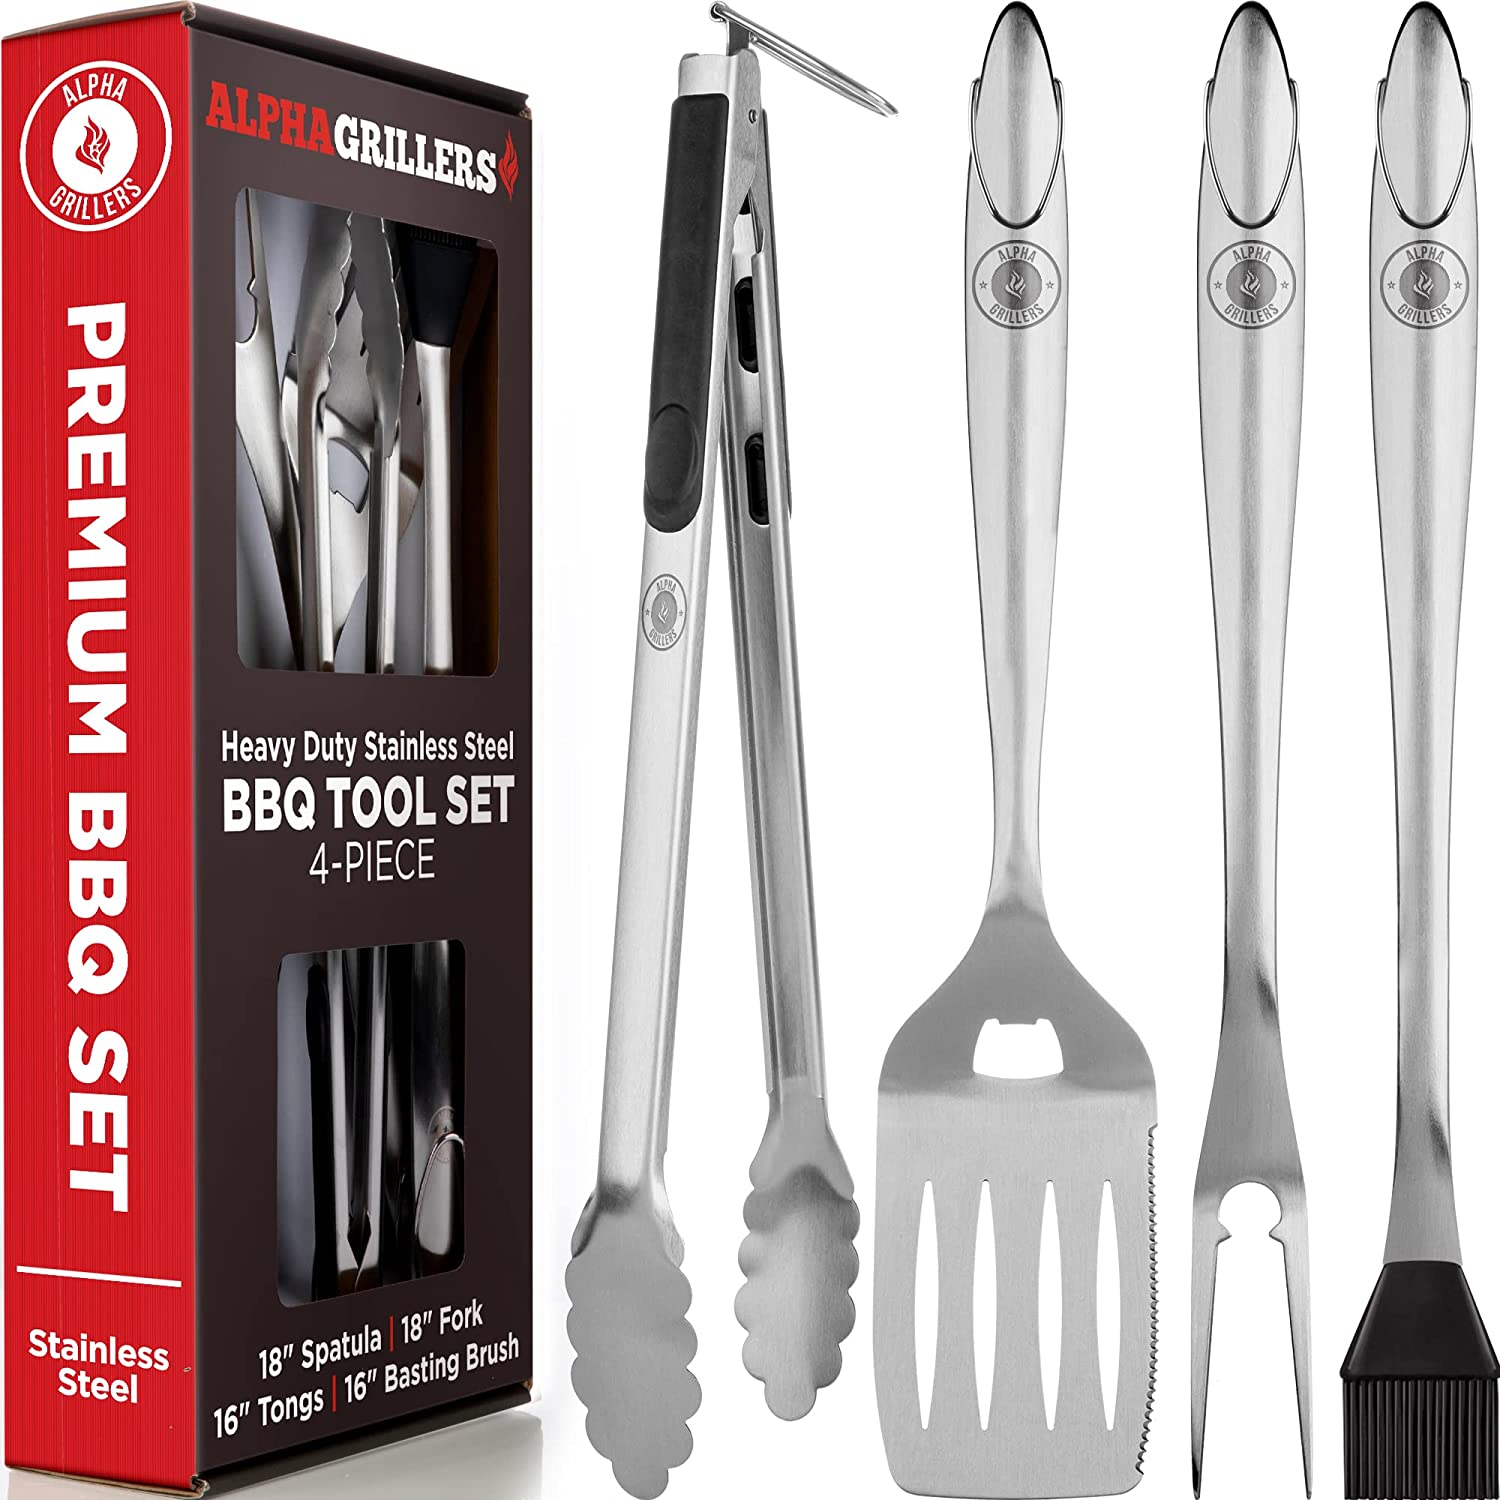 Alpha Grillers Lockable Tongs Barbecue Grilling Tools Set, 4-Piece